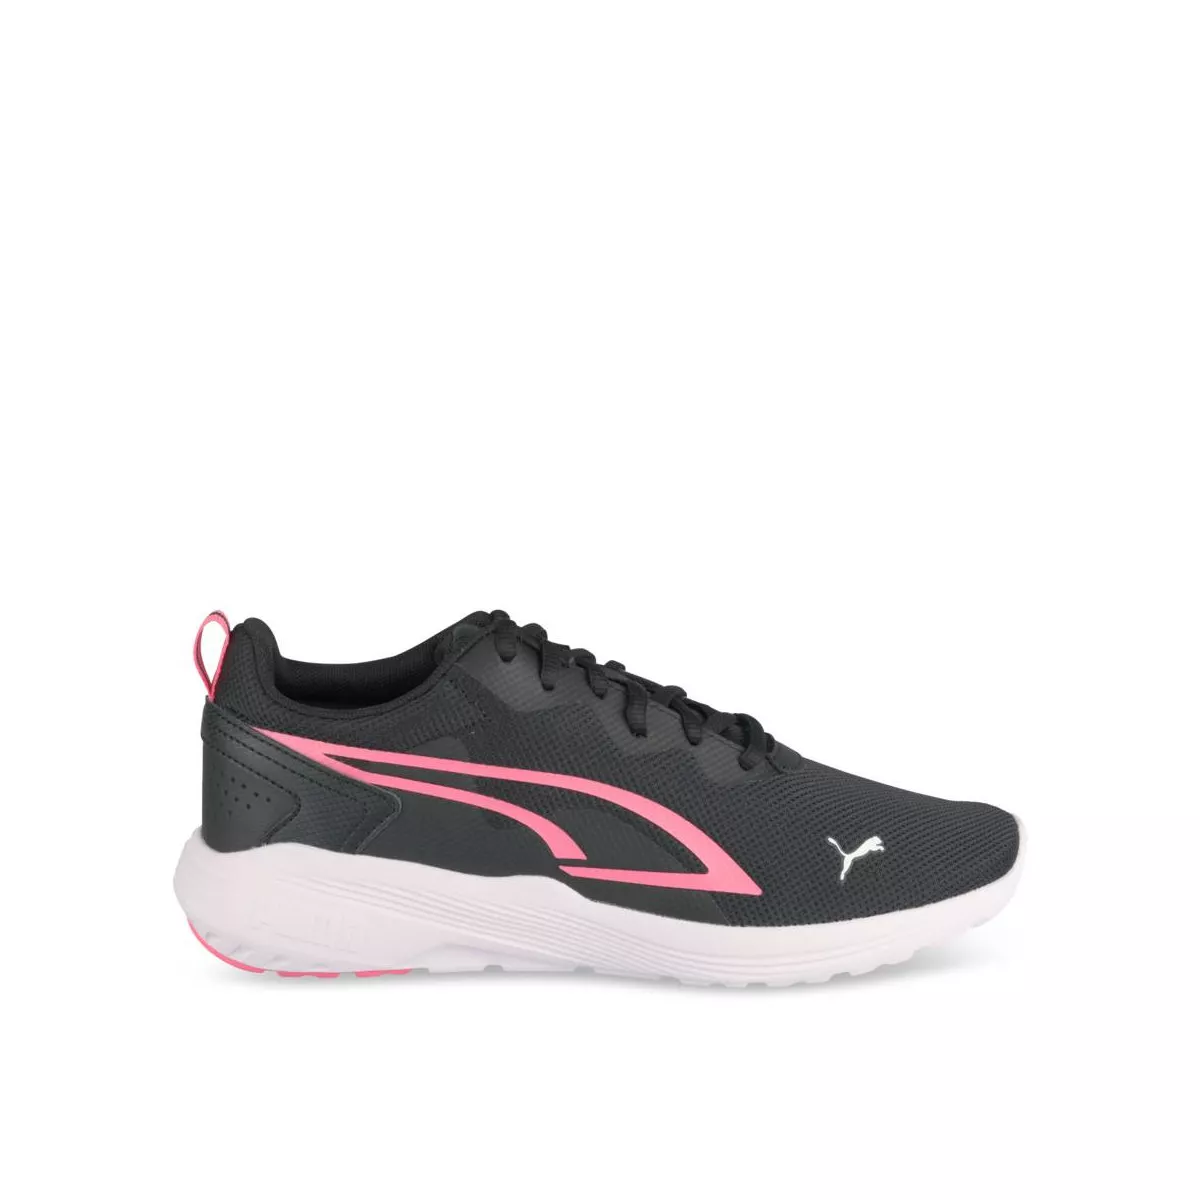 All-Day Active Sneakers BLACK PUMA